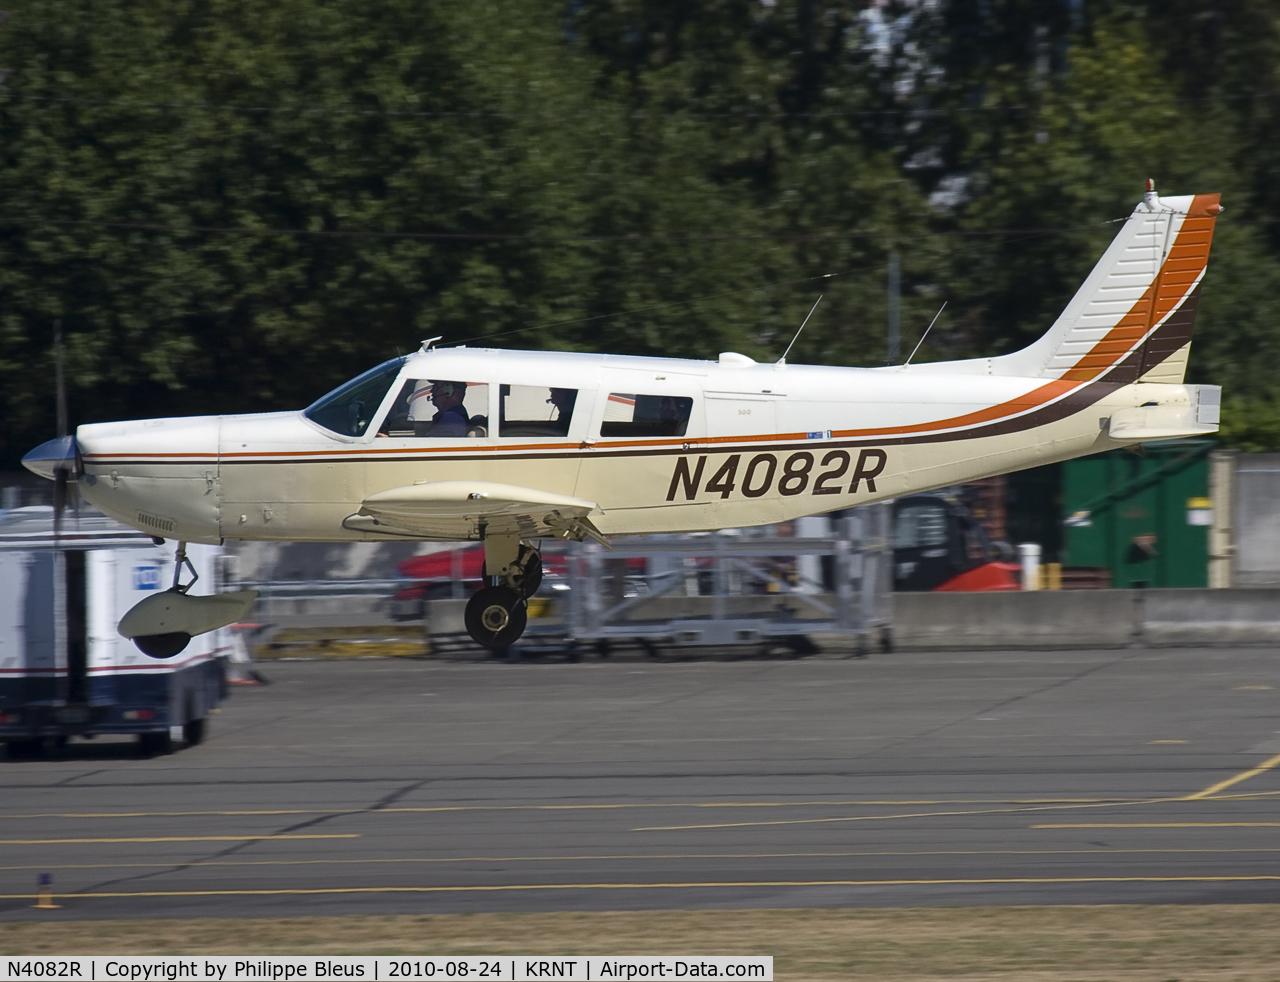 N4082R, 1968 Piper PA-32-300 Cherokee Six C/N 32-40398, Good old Saratoga about to land on rwy 34.